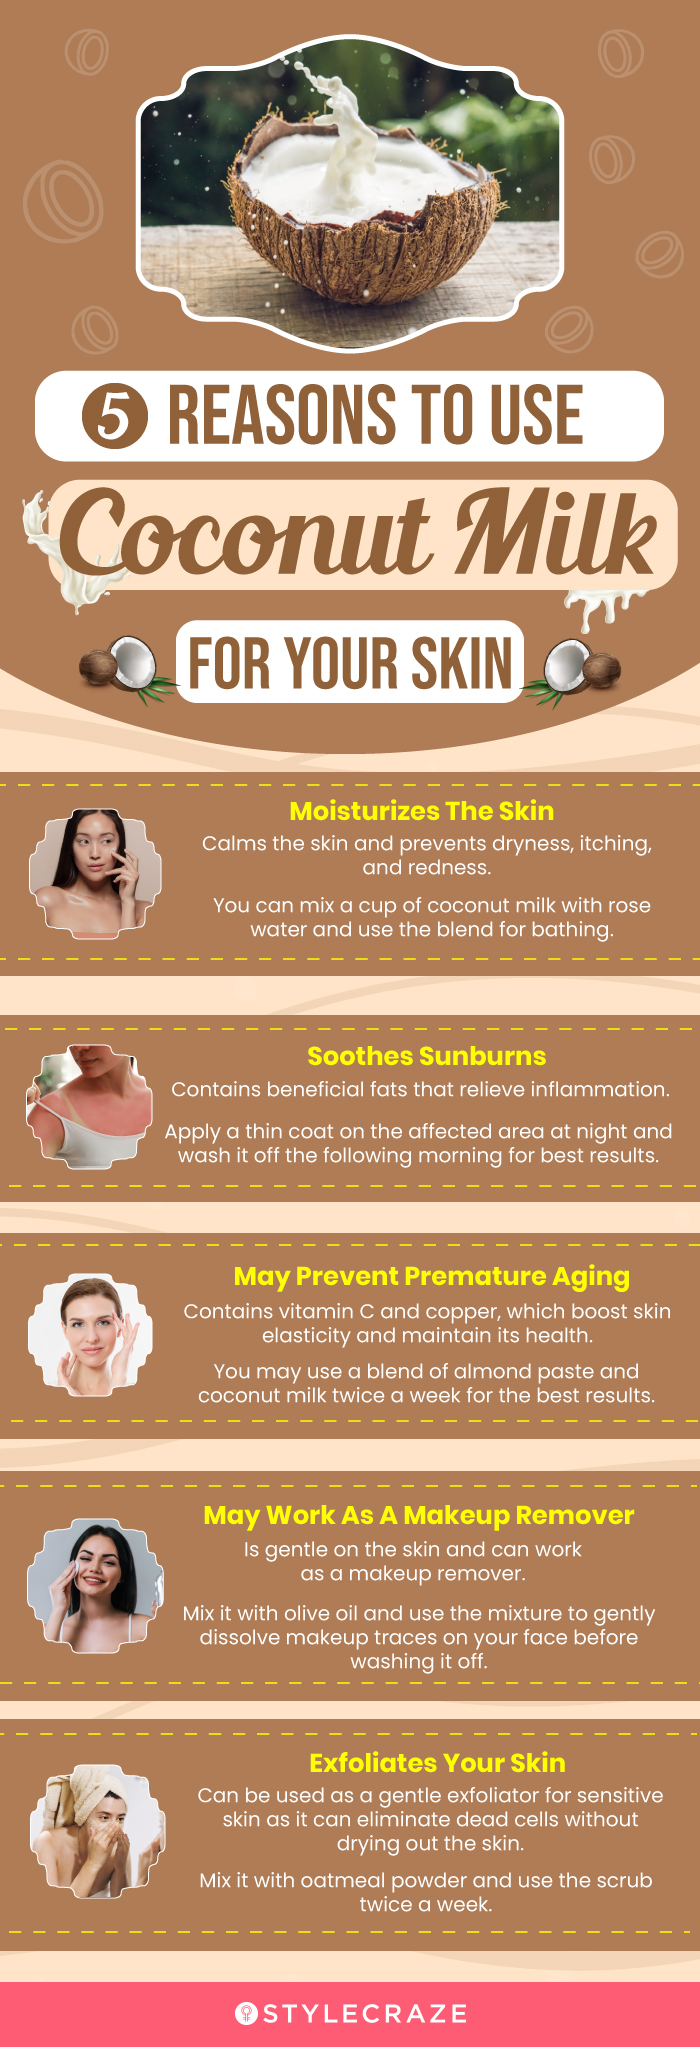 5 reasons to use coconut milk for your skin (infographic)